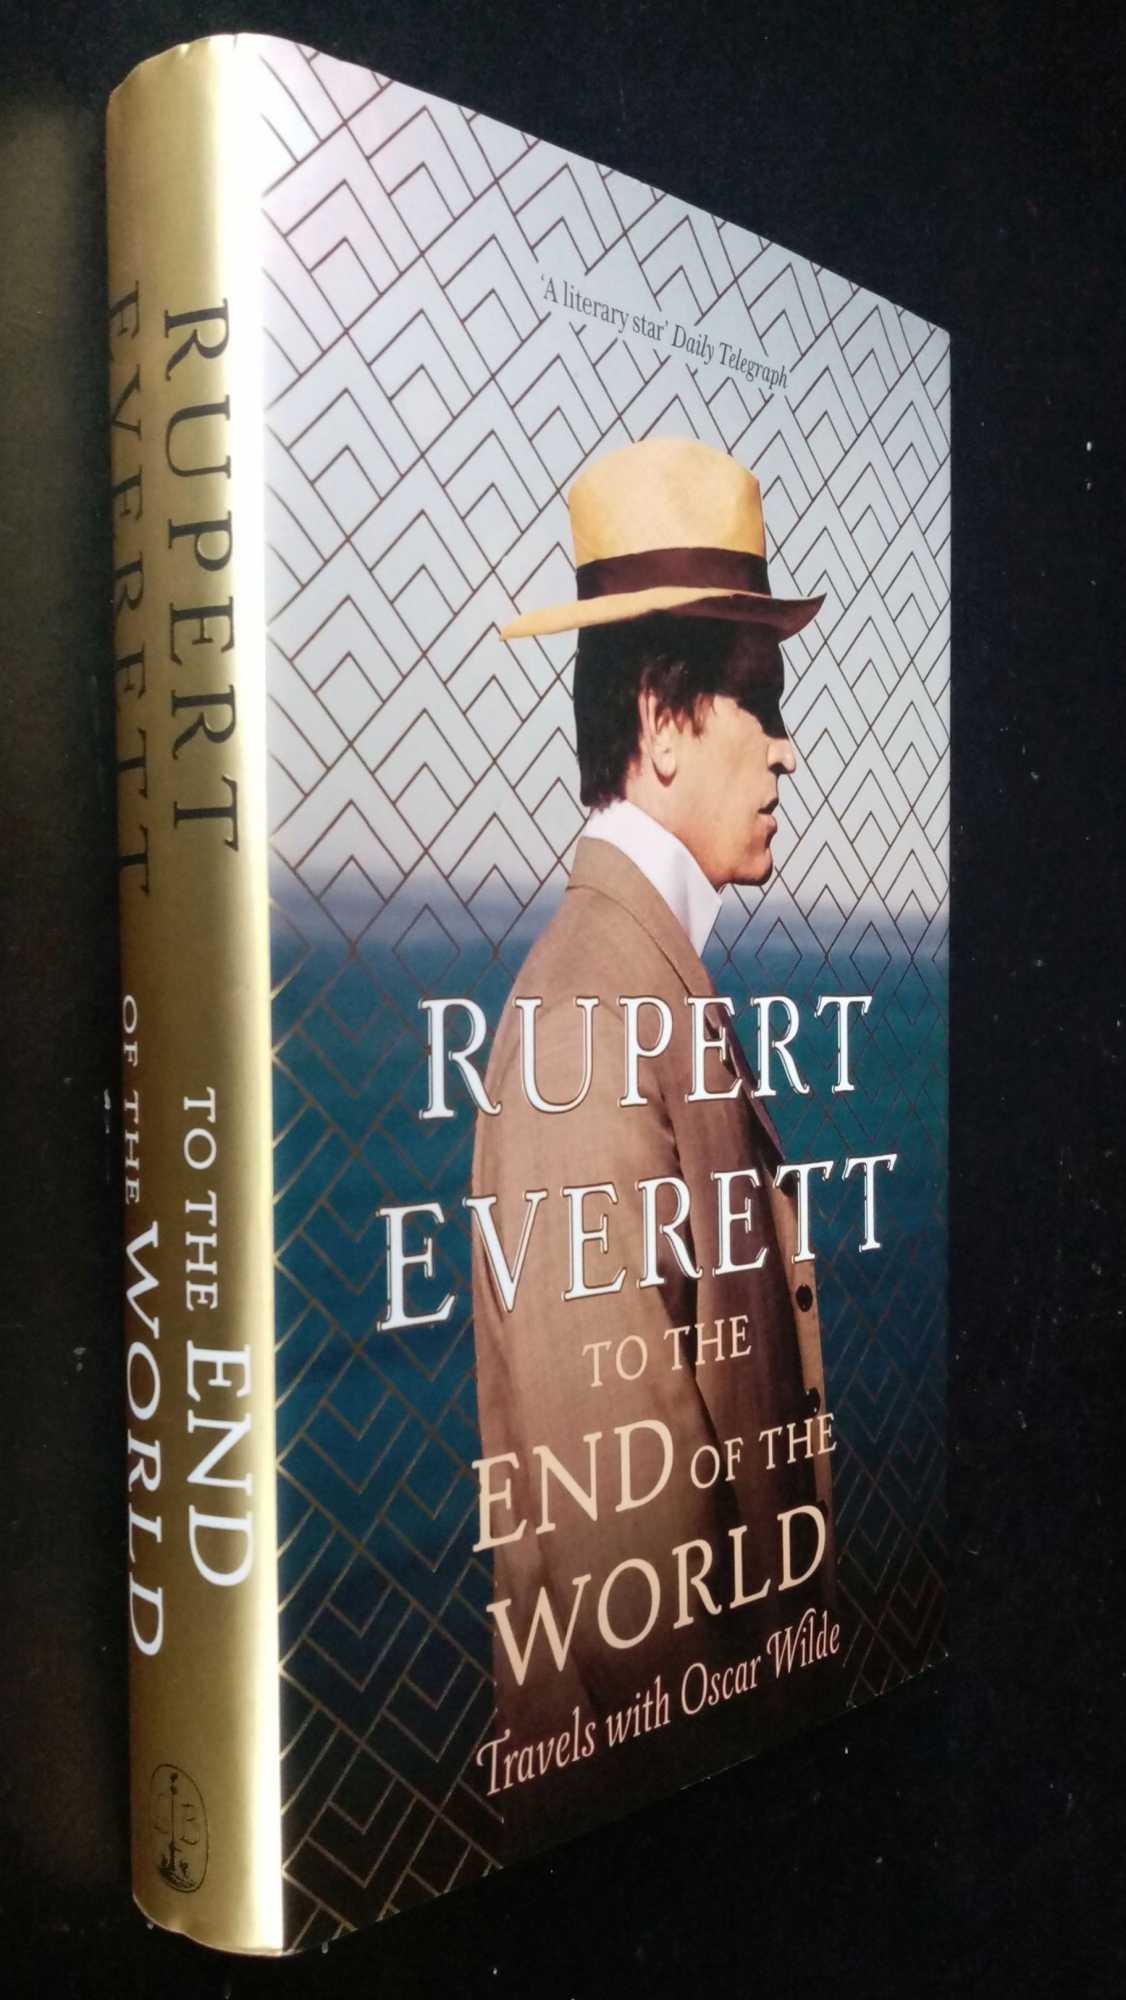 Rupert Everett - To the End of the World: Travels with Oscar Wilde